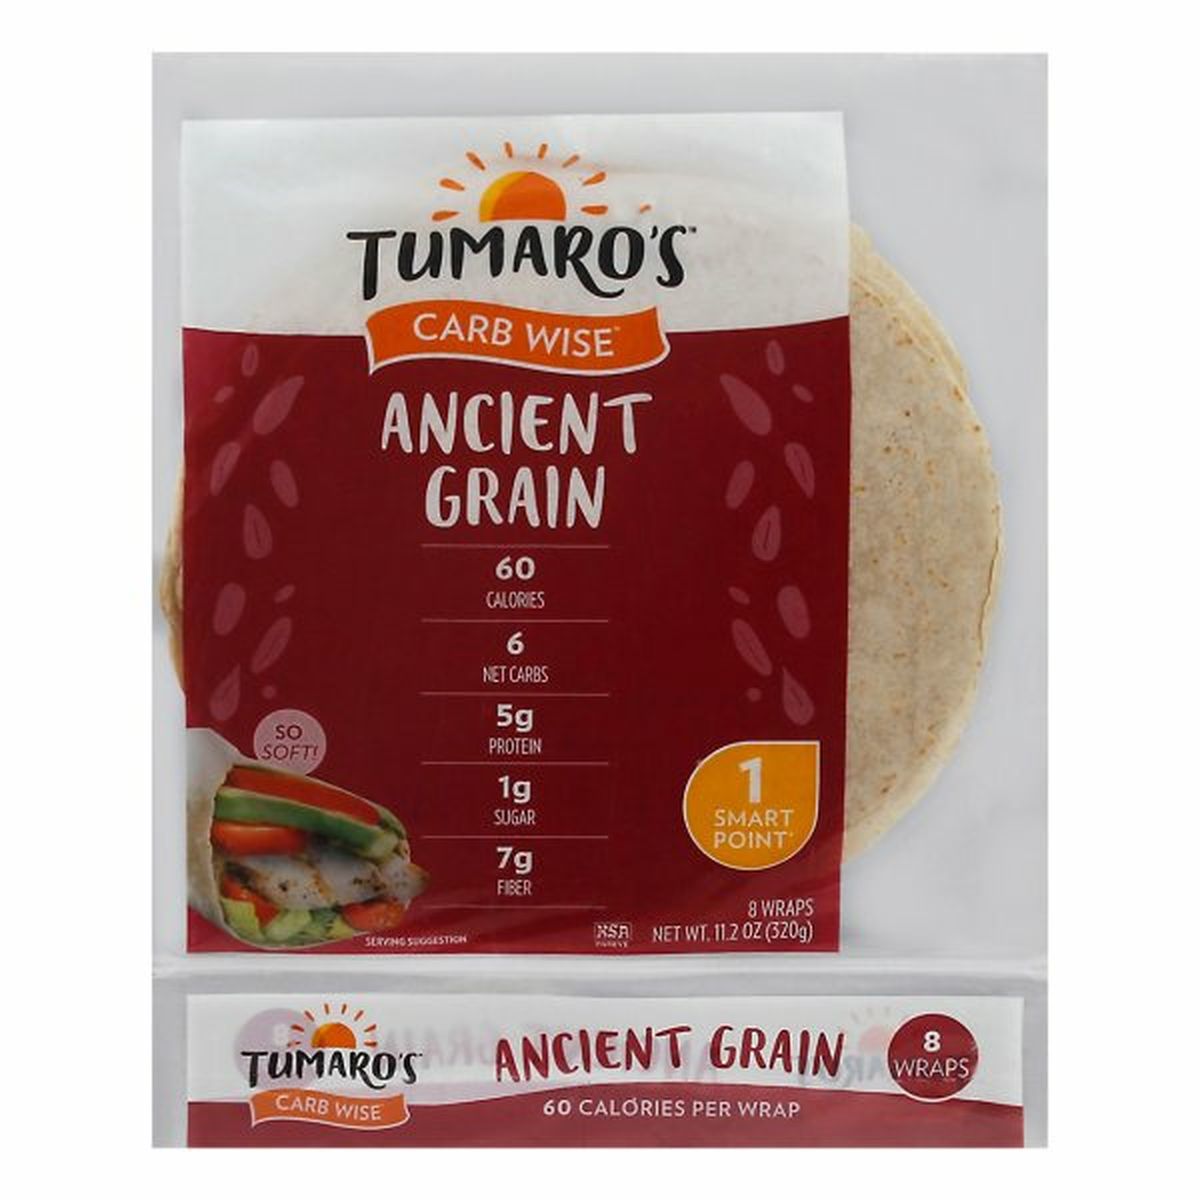 Calories in Tumaro's Carb Wise Wraps, Ancient Grain